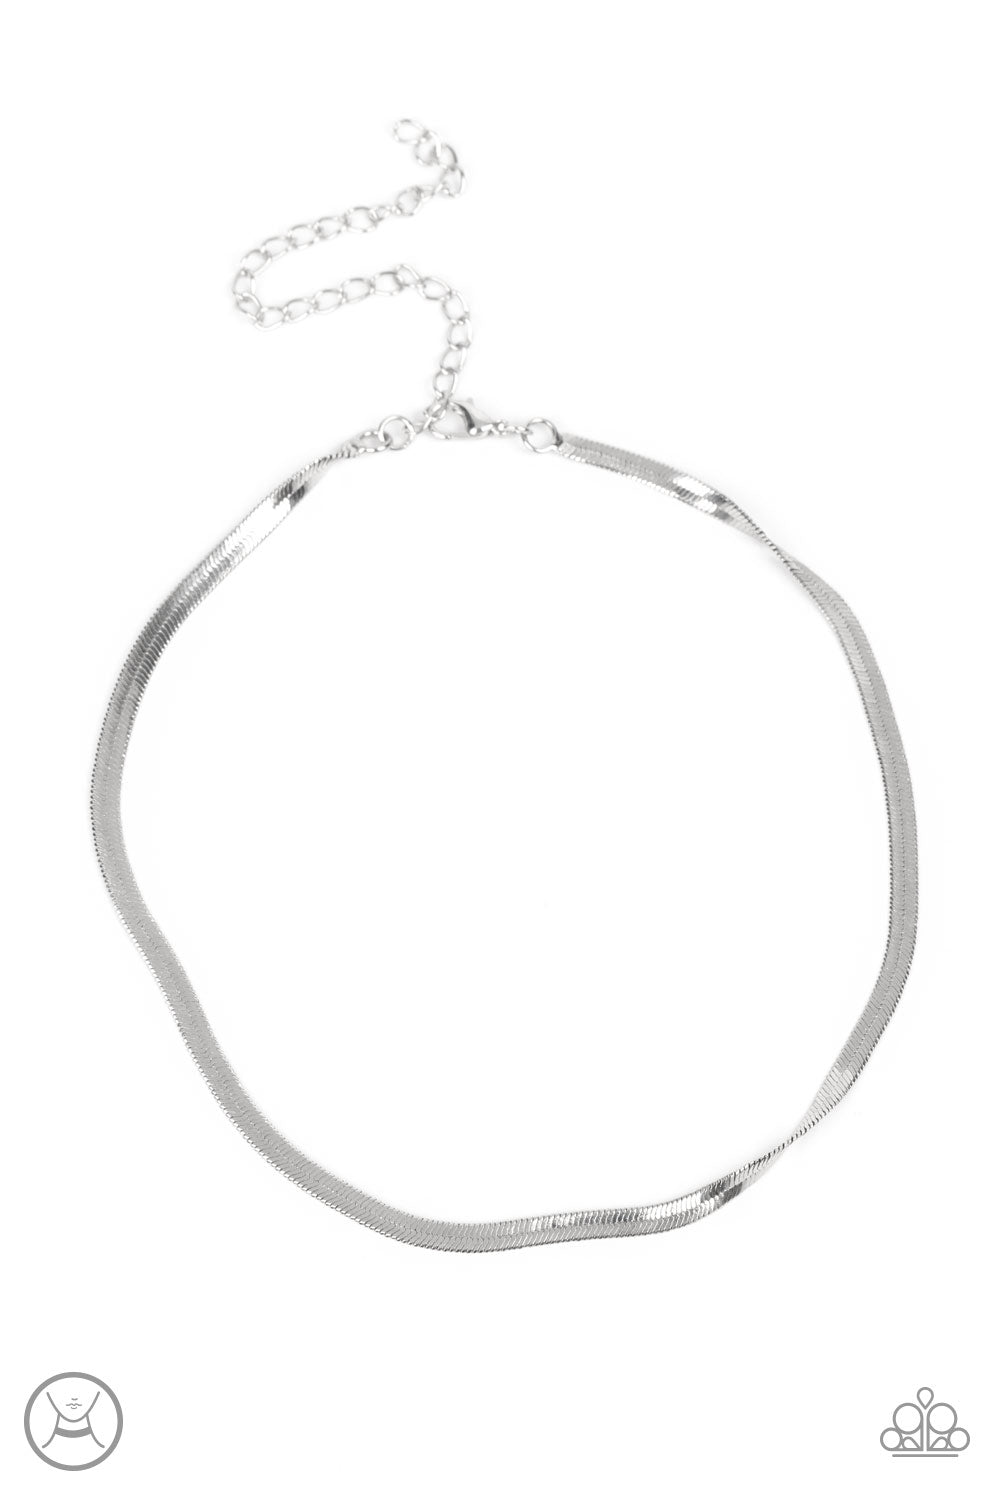 In No Time Flat - silver - Paparazzi necklace